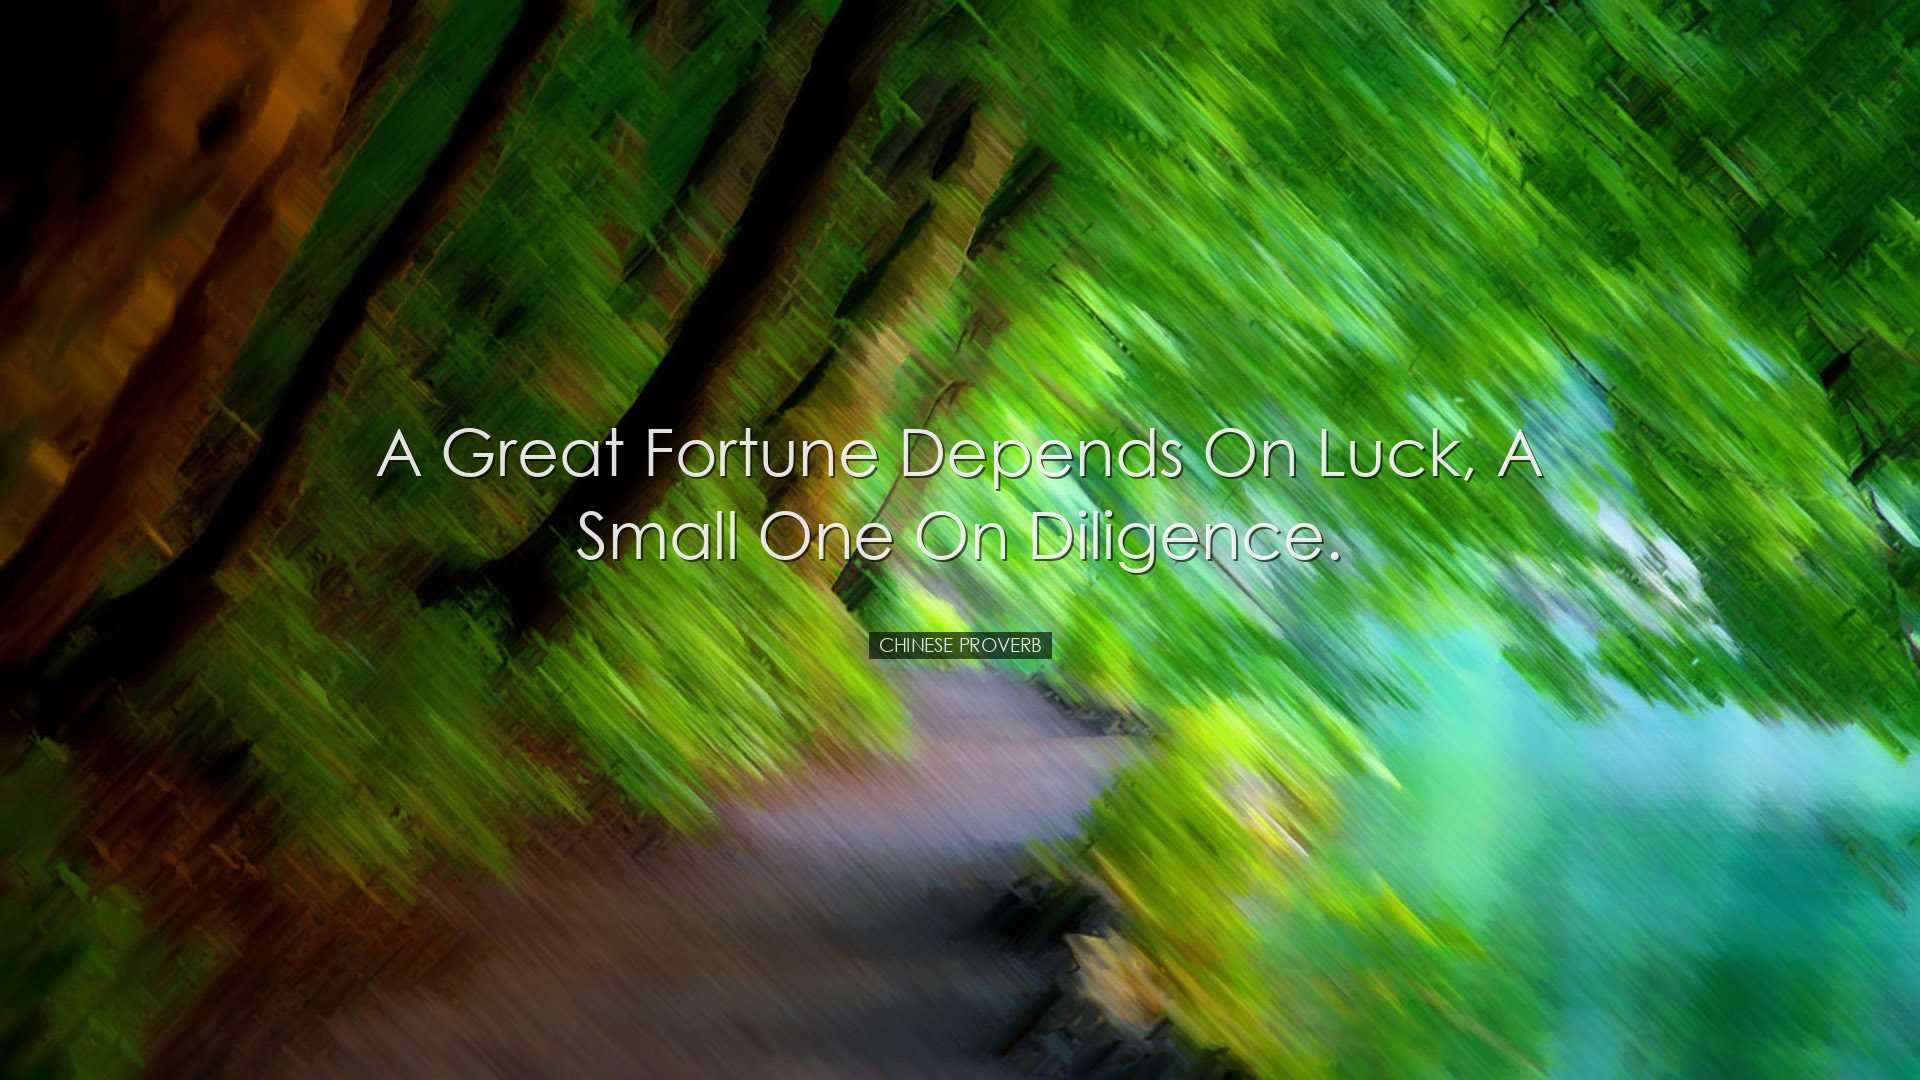 A great fortune depends on luck, a small one on diligence. - Chine